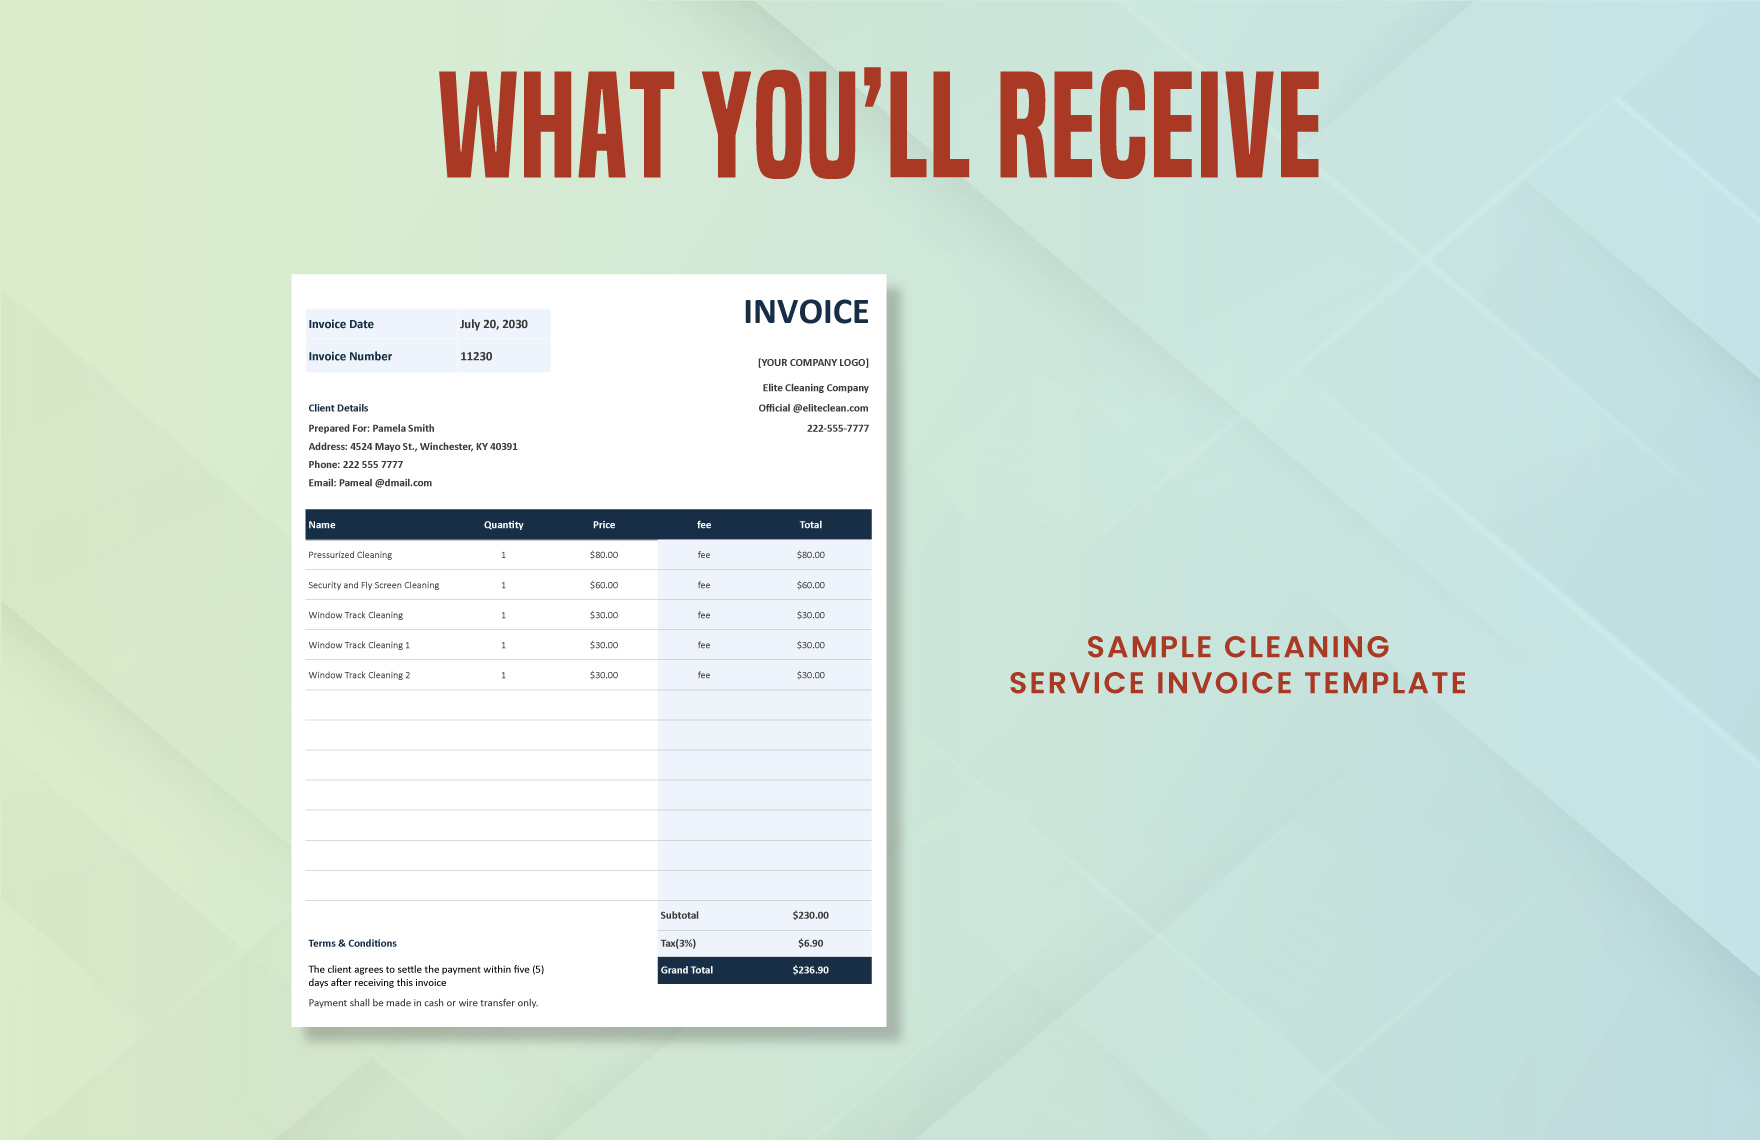 Sample Cleaning Service Invoice Template